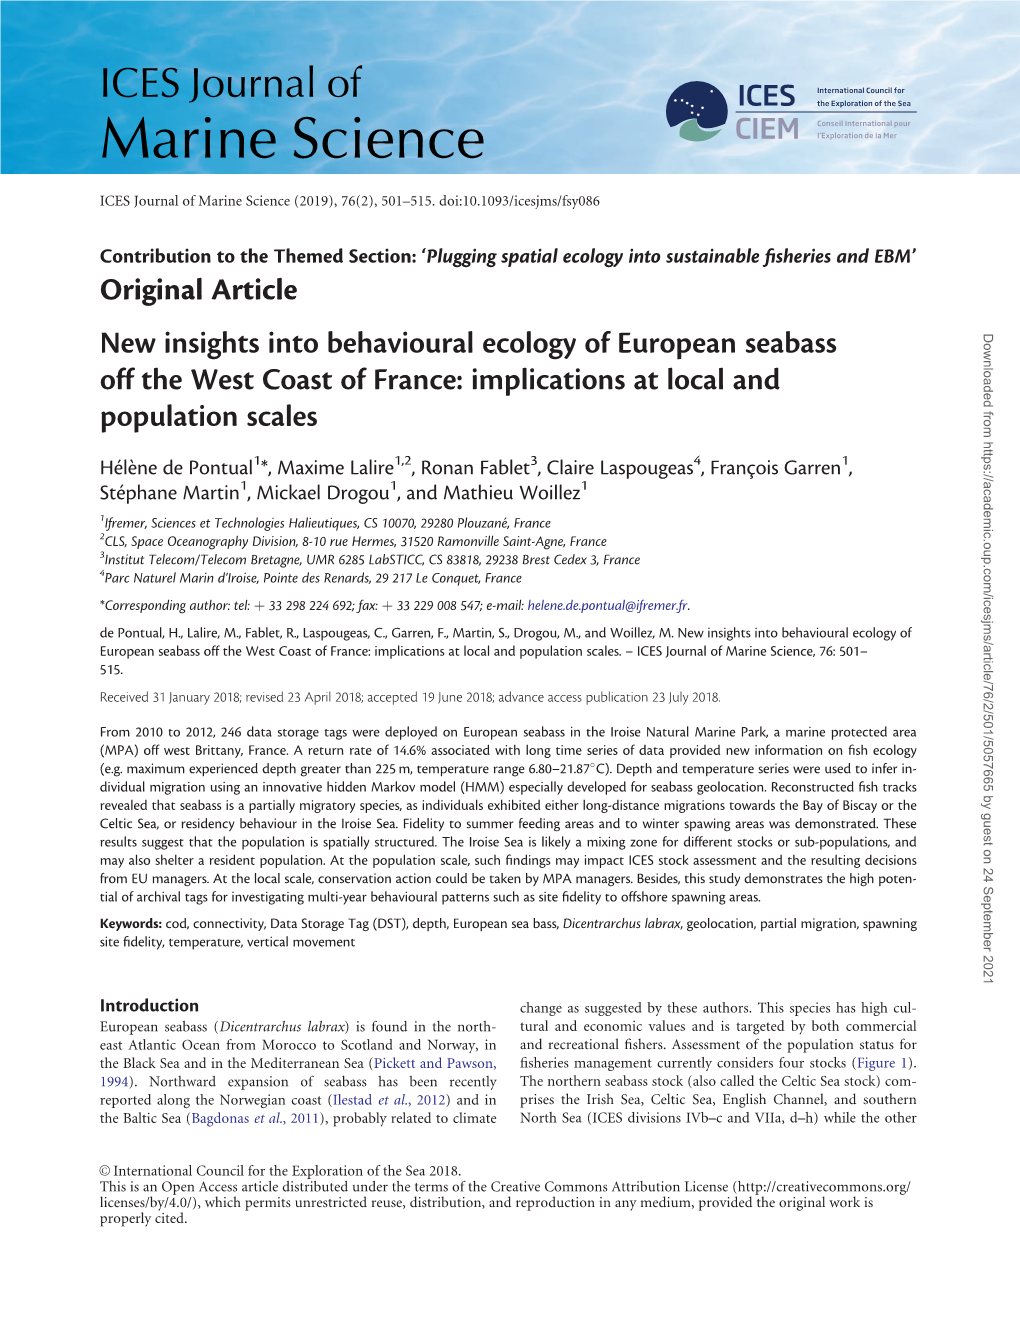 Original Article New Insights Into Behavioural Ecology of European